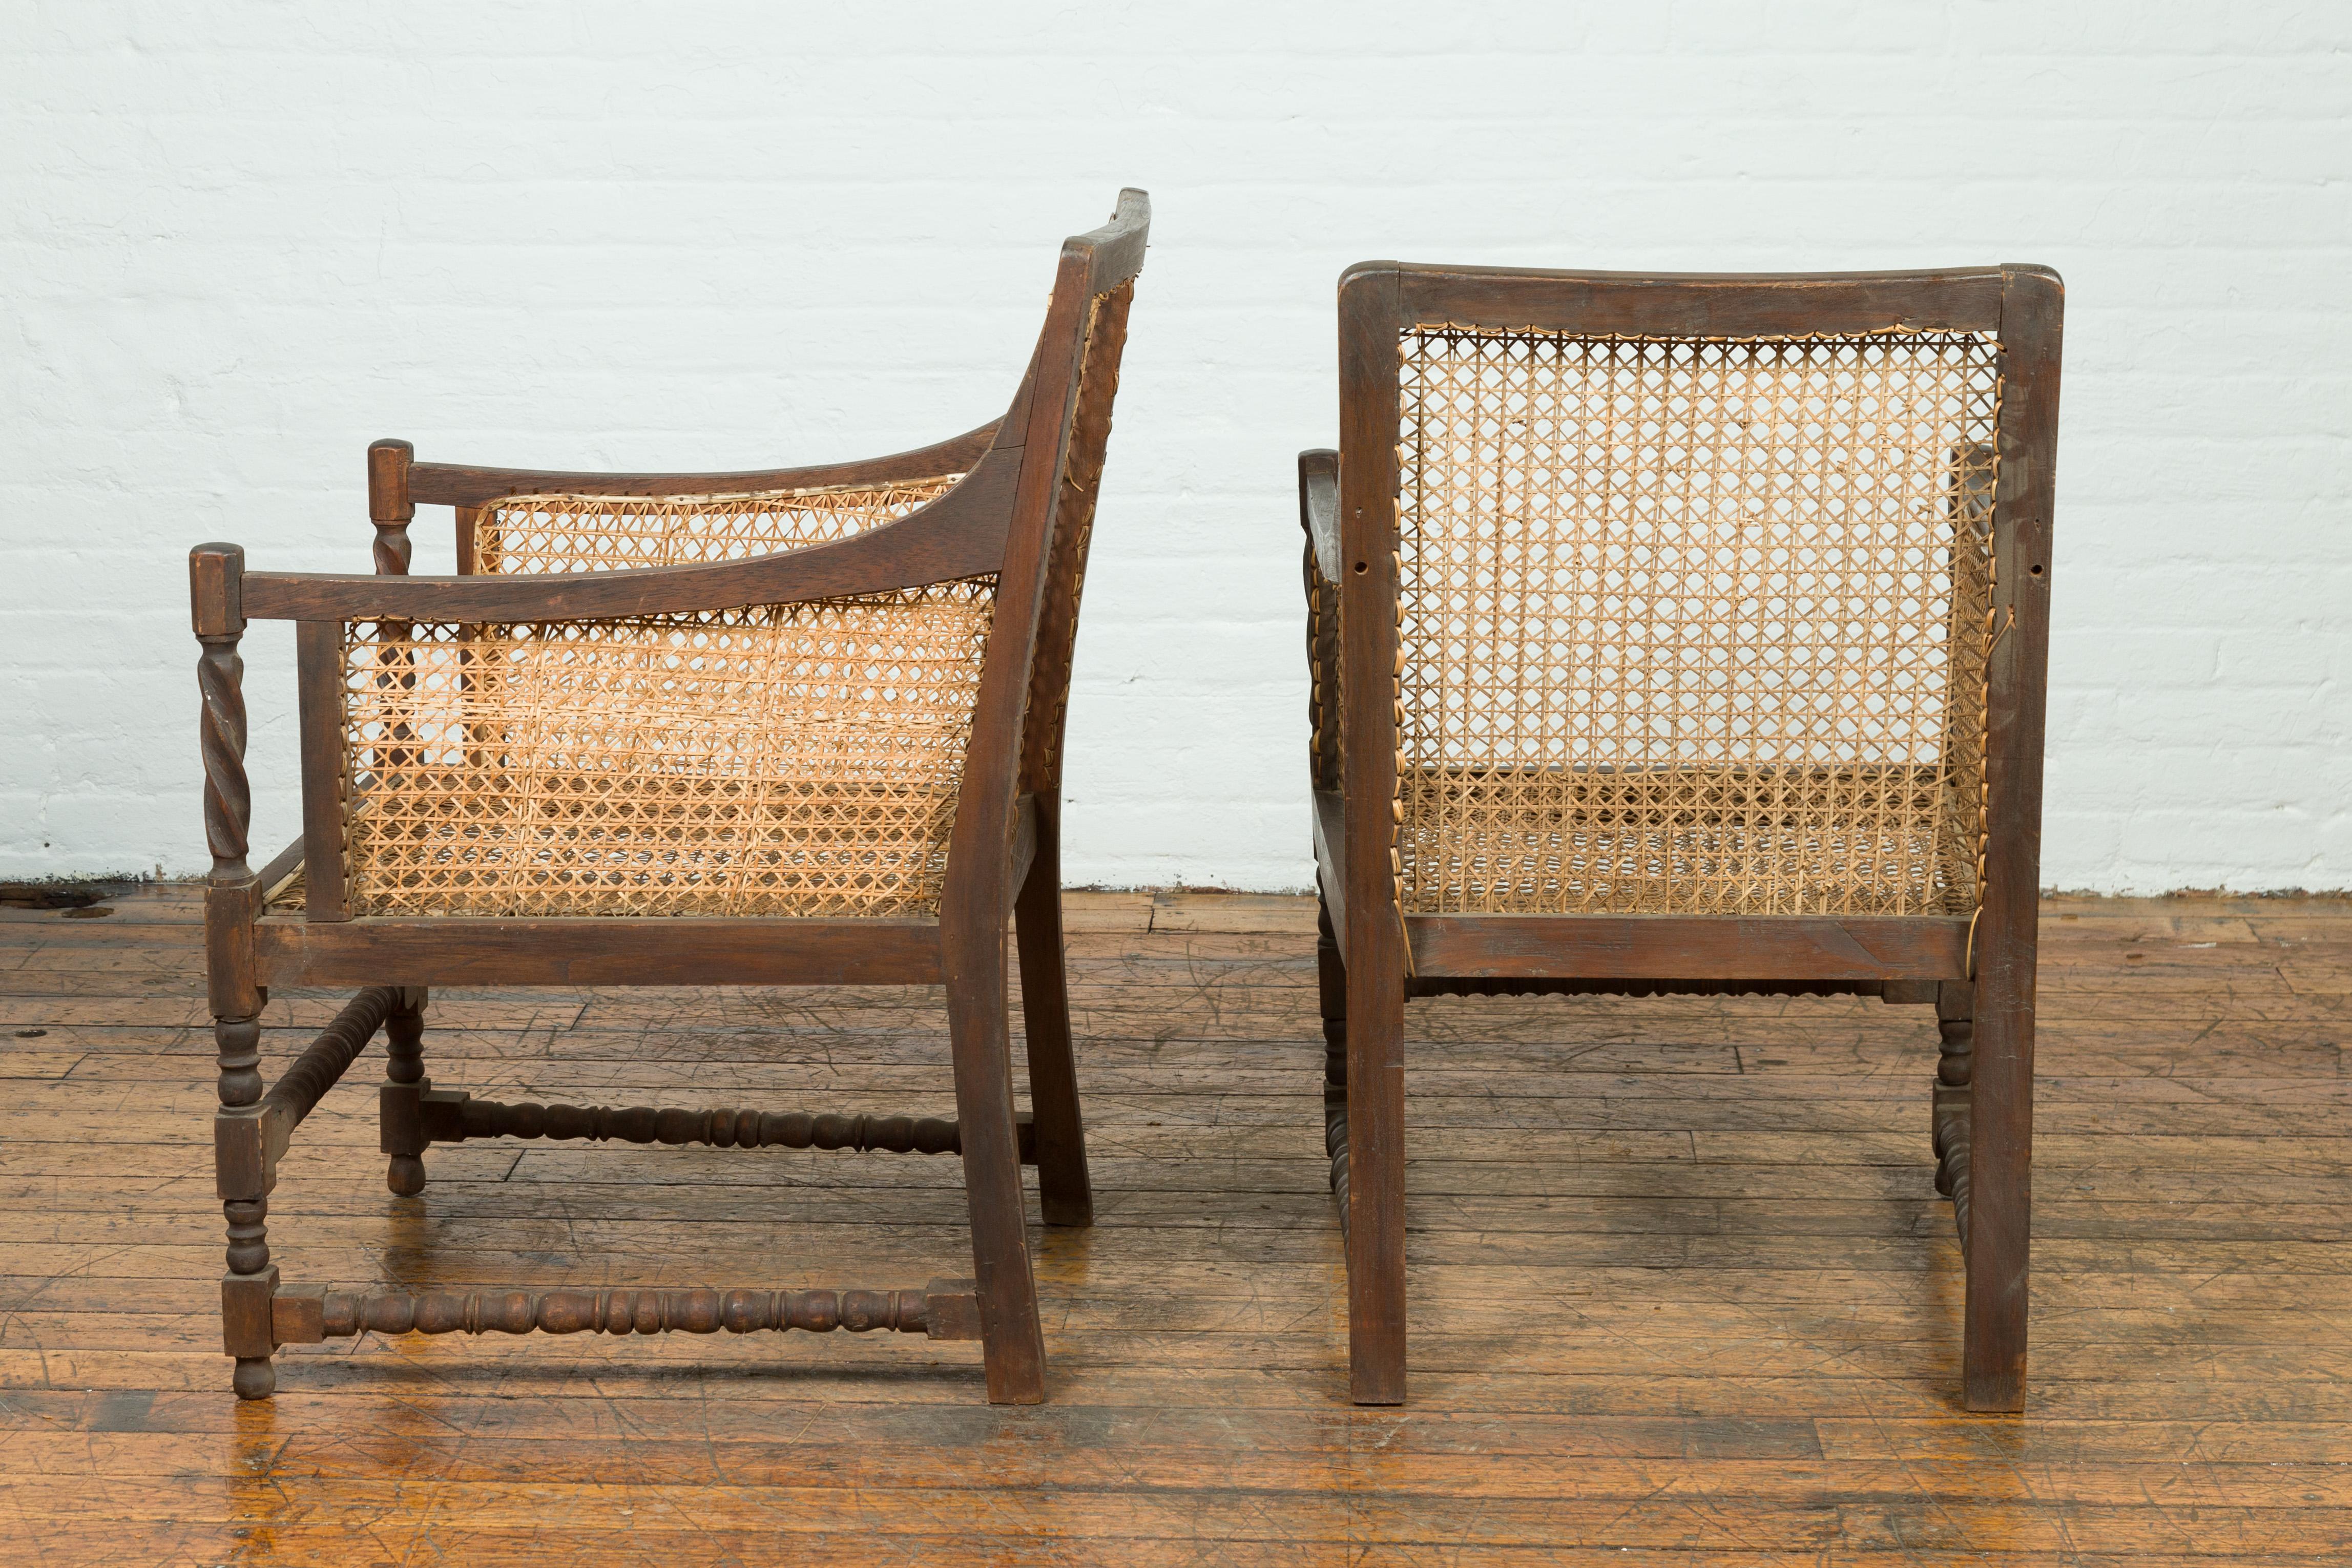 Pair of Antique Rustic Thai Turned Wood Armchairs with Rattan Backs and Seats 9